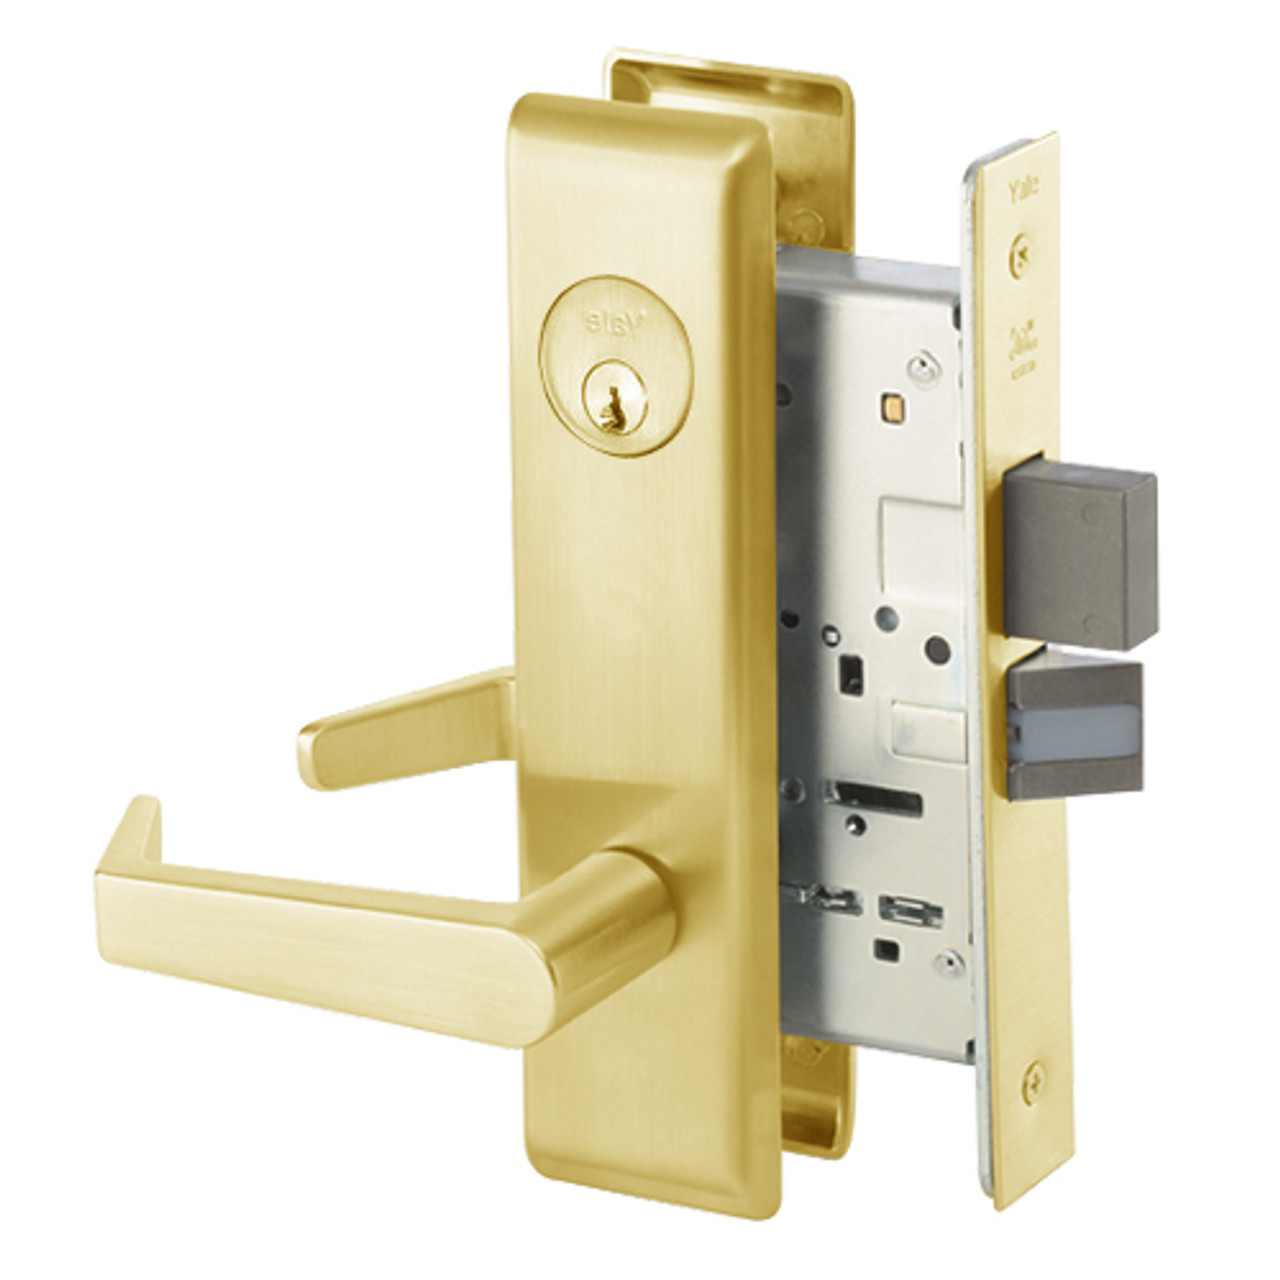 AUCN8811-2FL-605 Yale 8800FL Series Double Cylinder Mortise Classroom Deadbolt Locks with Augusta Lever in Bright Brass